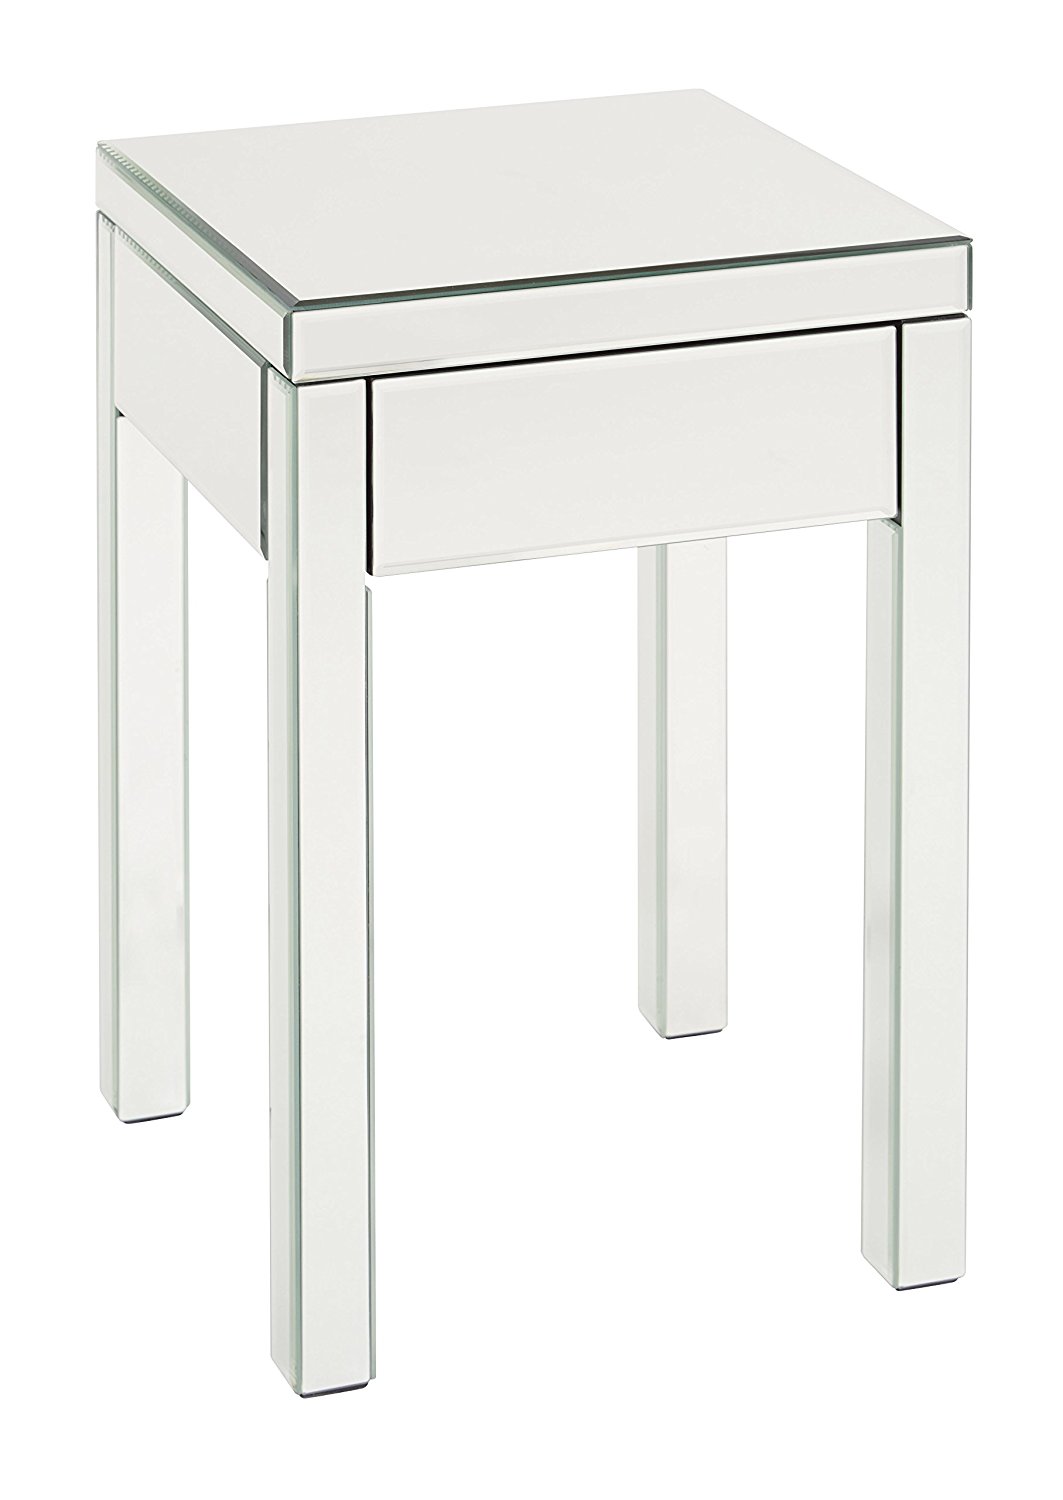 AVE SIX Reflections End Table with Drawer, Silver Mirrored Finish